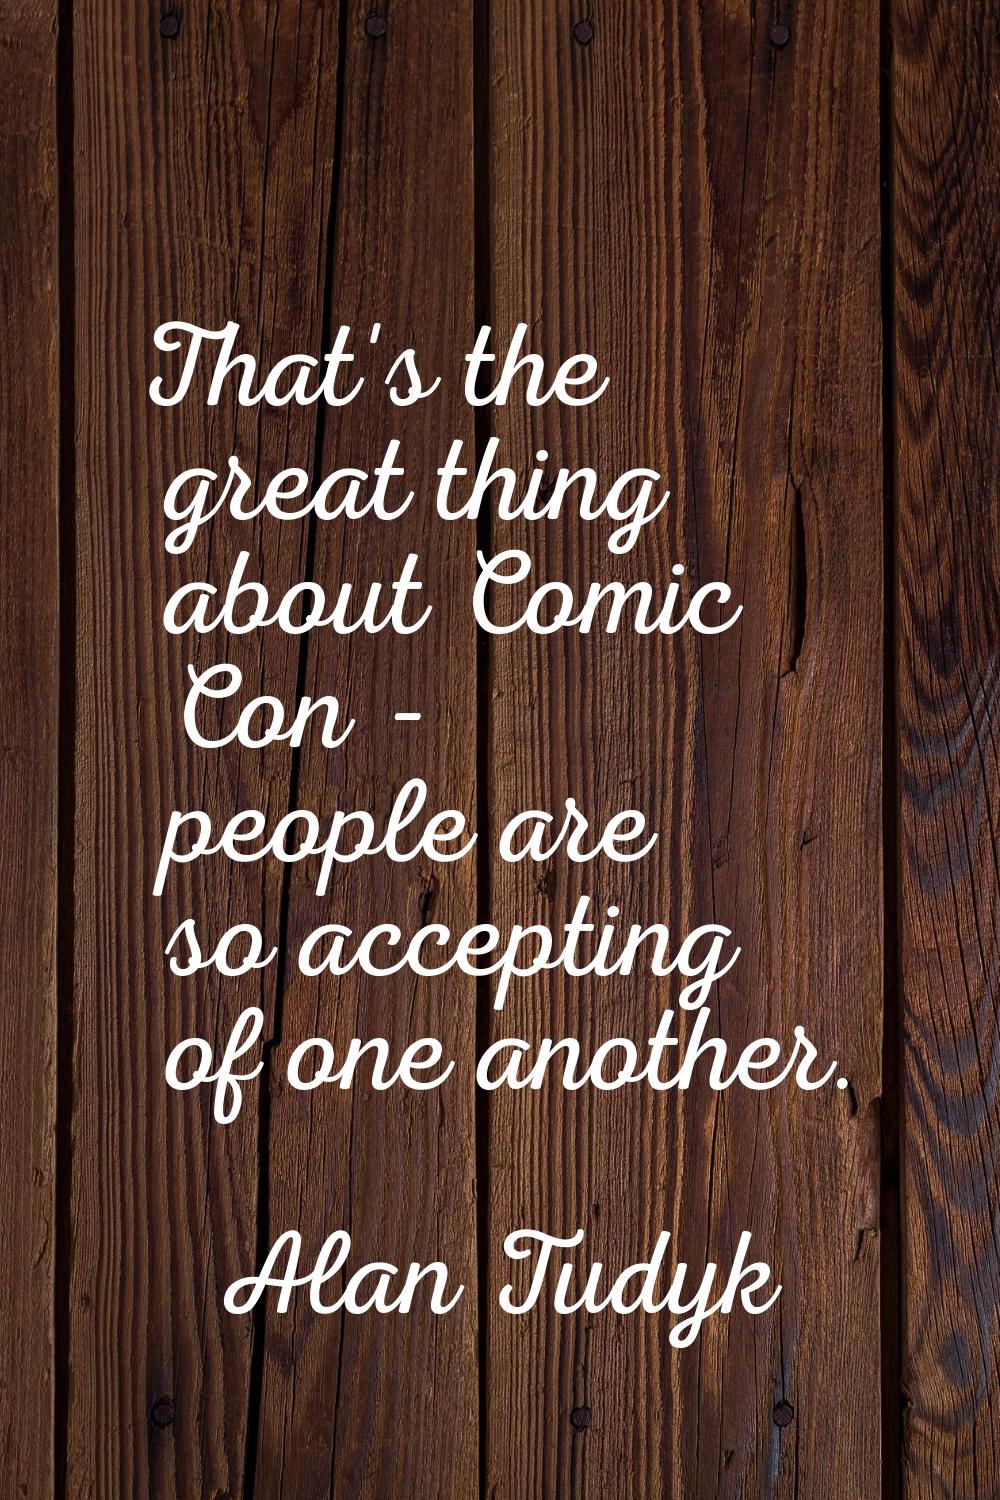 That's the great thing about Comic Con - people are so accepting of one another.